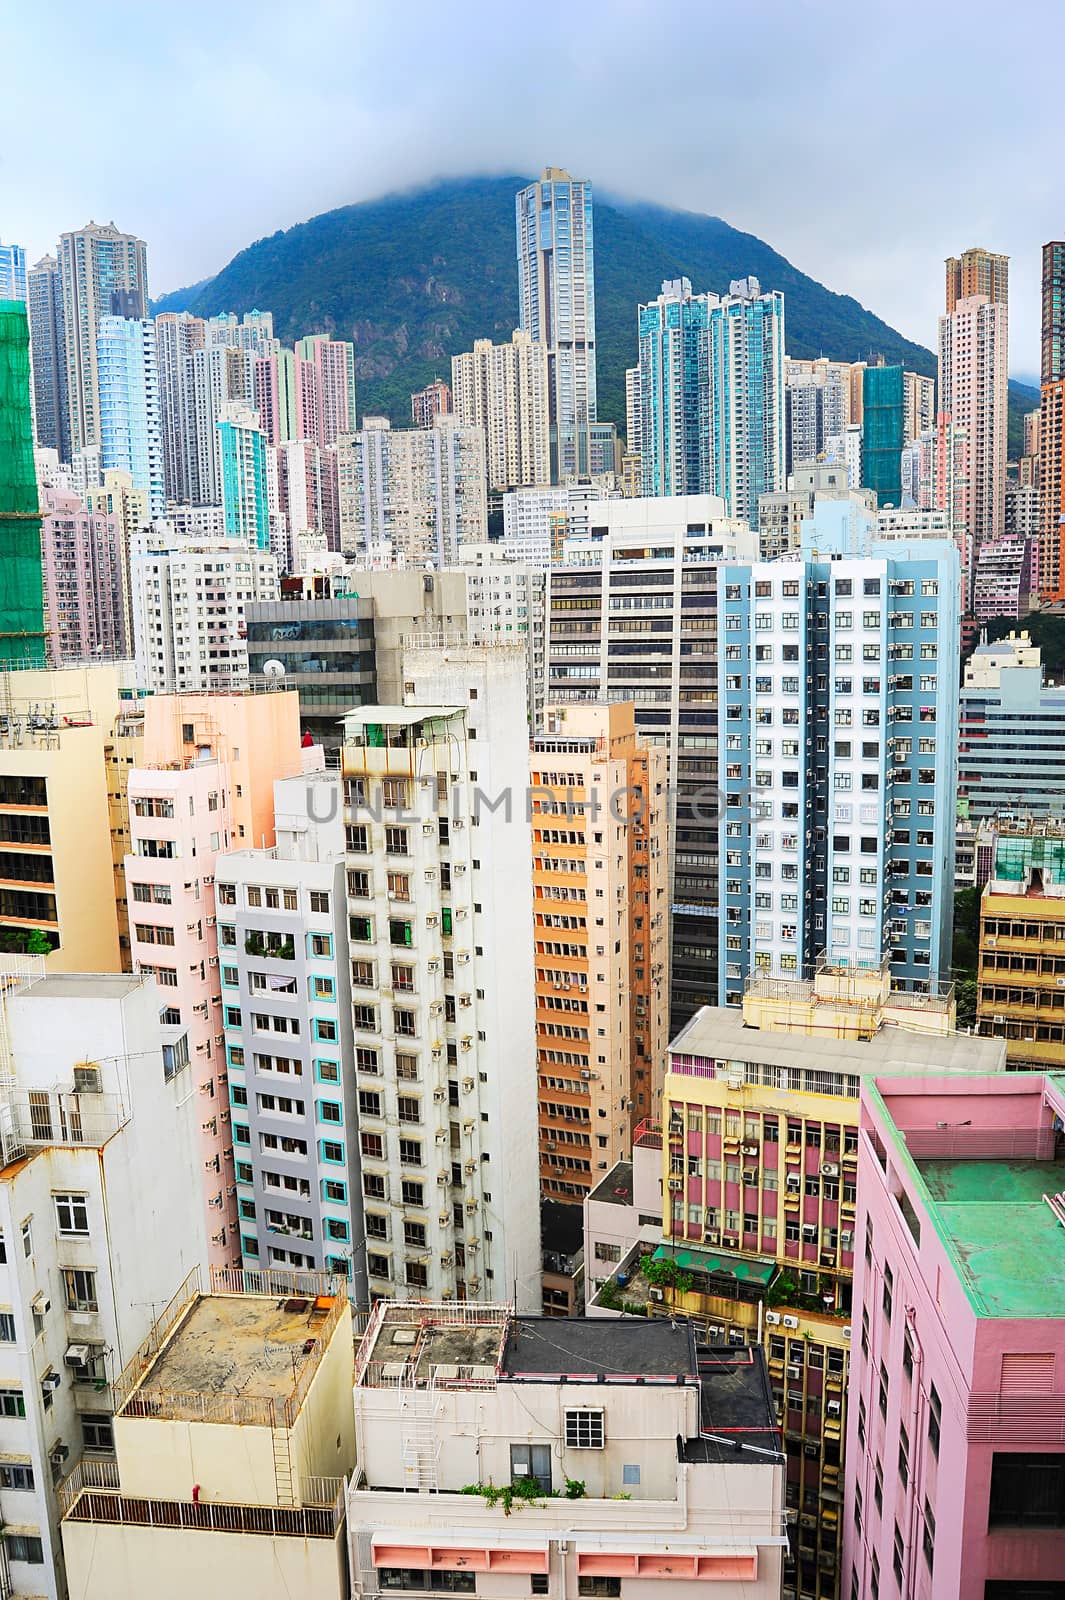 Hong Kong is one of most densely populated city in the world